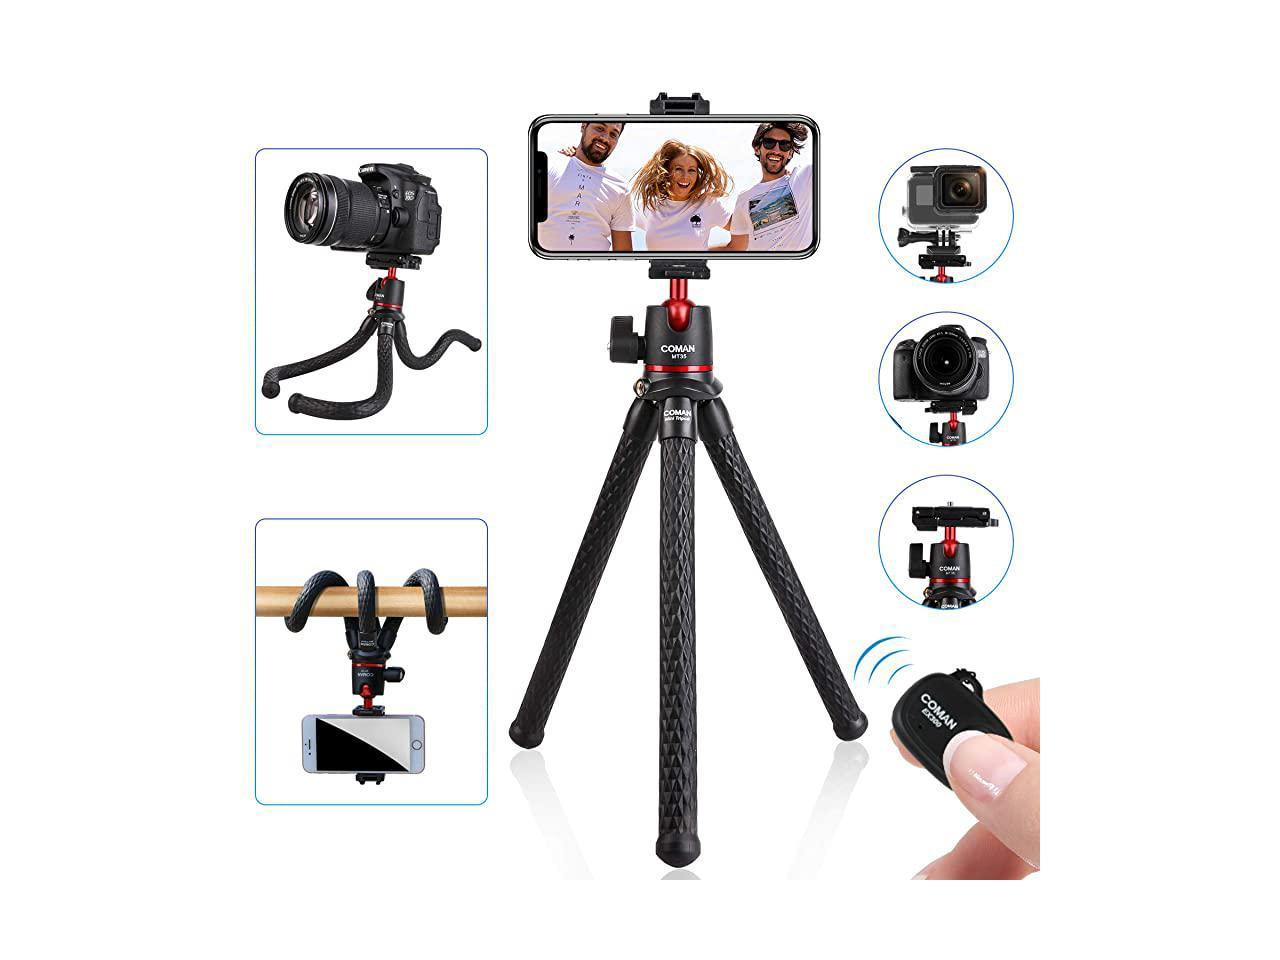 Portable Phone Tripod waterproof with Wireless Remote for iPhone,Samsung,Cameras,DSLR,Gopro Coman MT35 Flexible Camera Tripod 